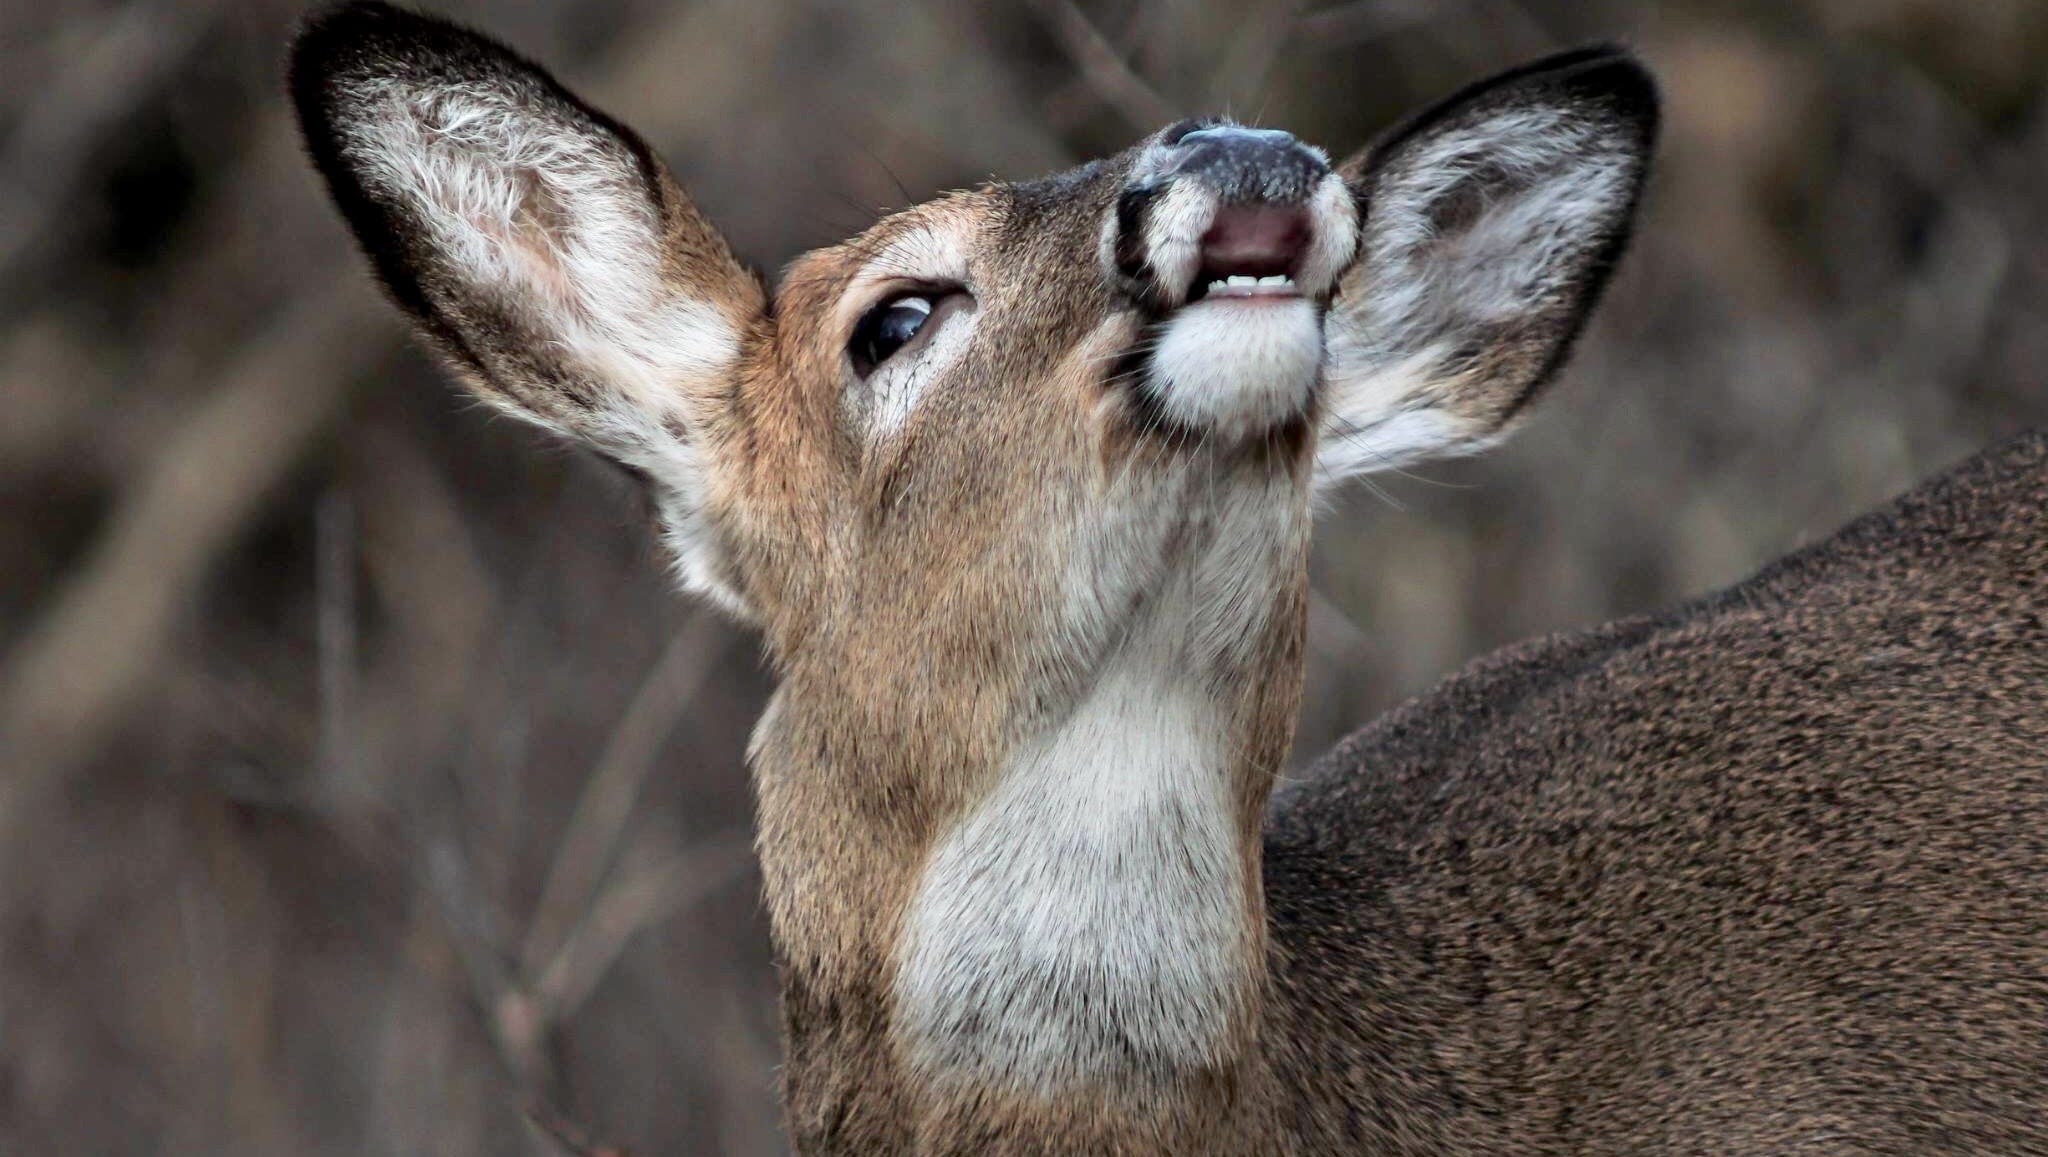 "I was taking photos of a large 9-point white-tailed buck," said James Timmer of Troy,  "when this doe came up a hill near me and stopped and started sniffing the air. I got this shot as she was in mid sniff."